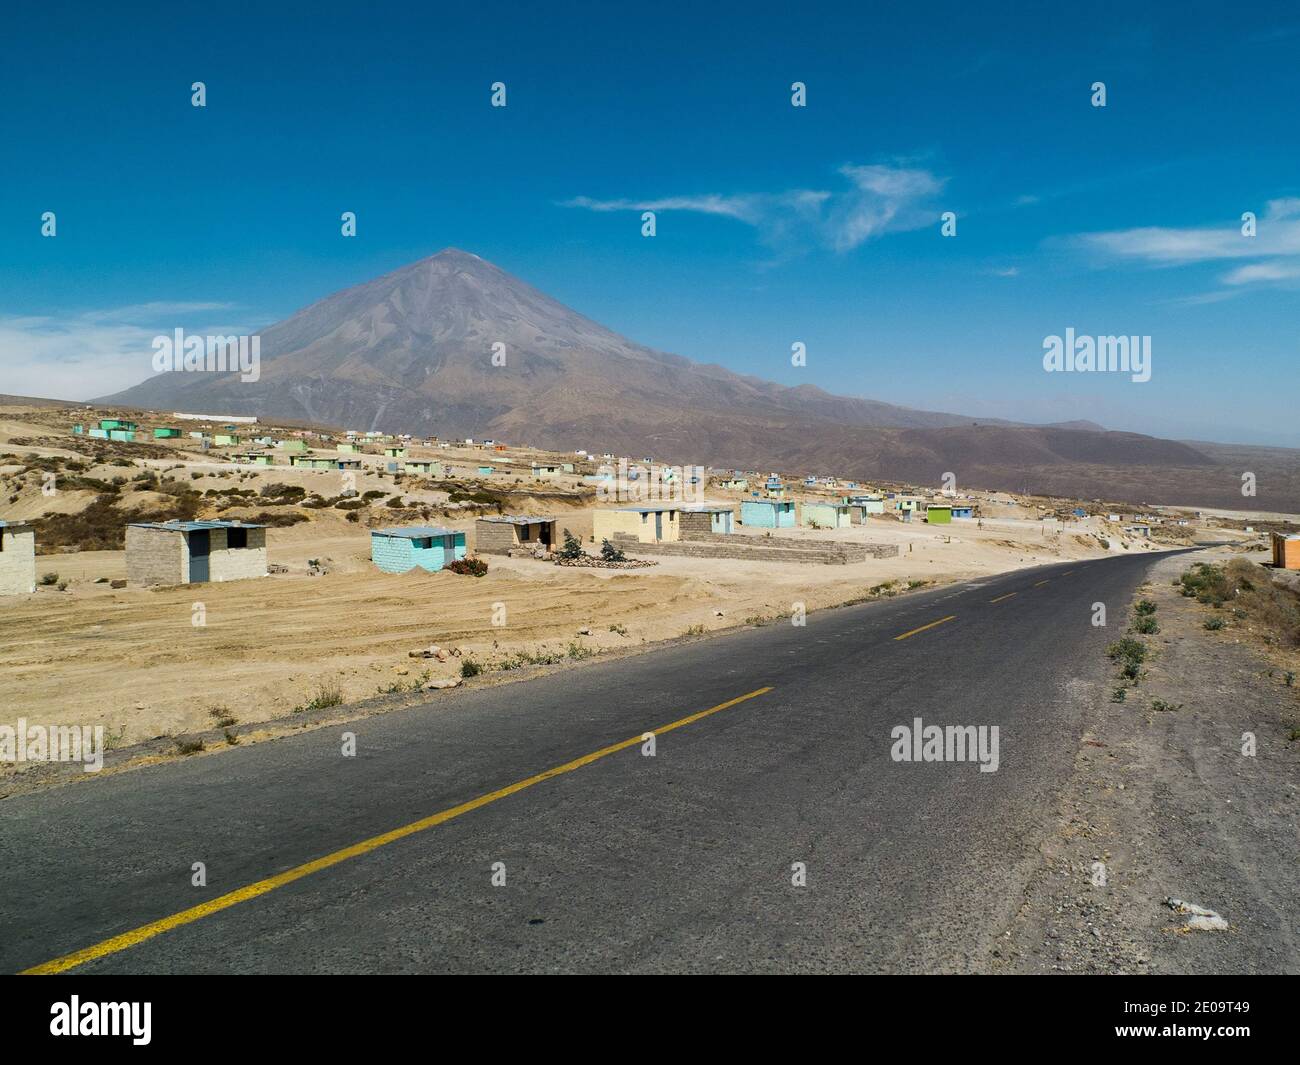 A road on the outskirts of Arequipa, Peru. Small concrete huts are scattered through the area, while the volcano Misti is seen behind Stock Photo